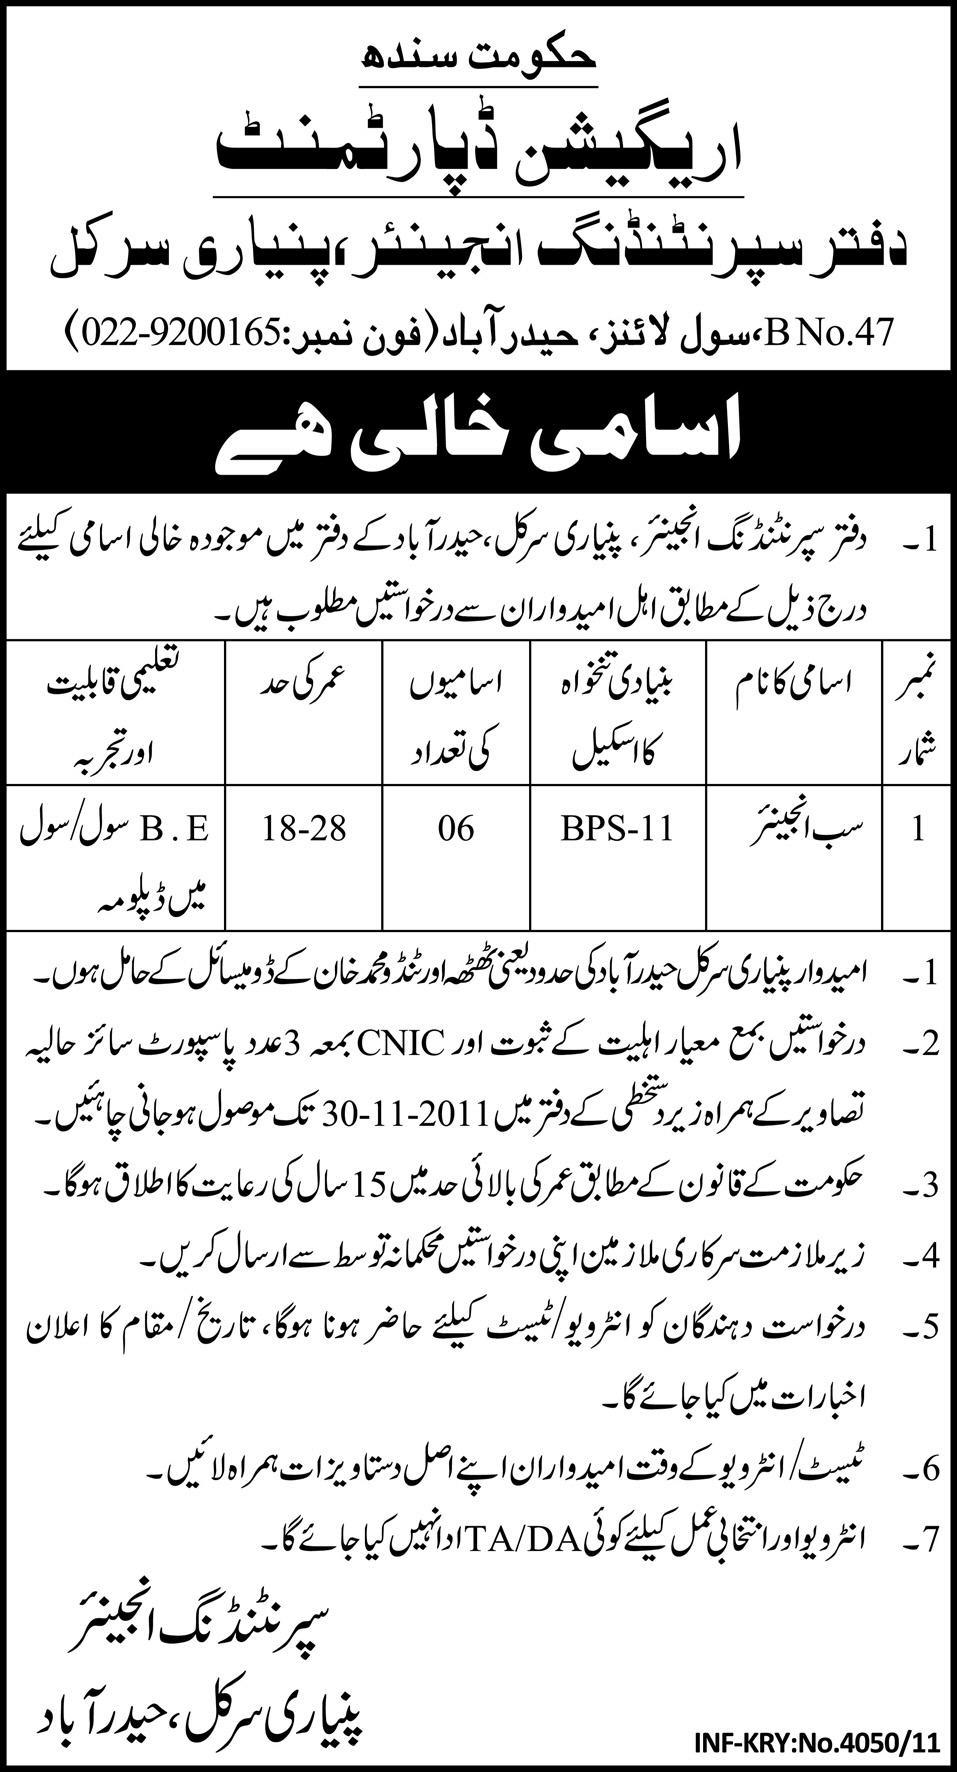 Sub Engineer Required by Irrigation Department, Government of Sindh